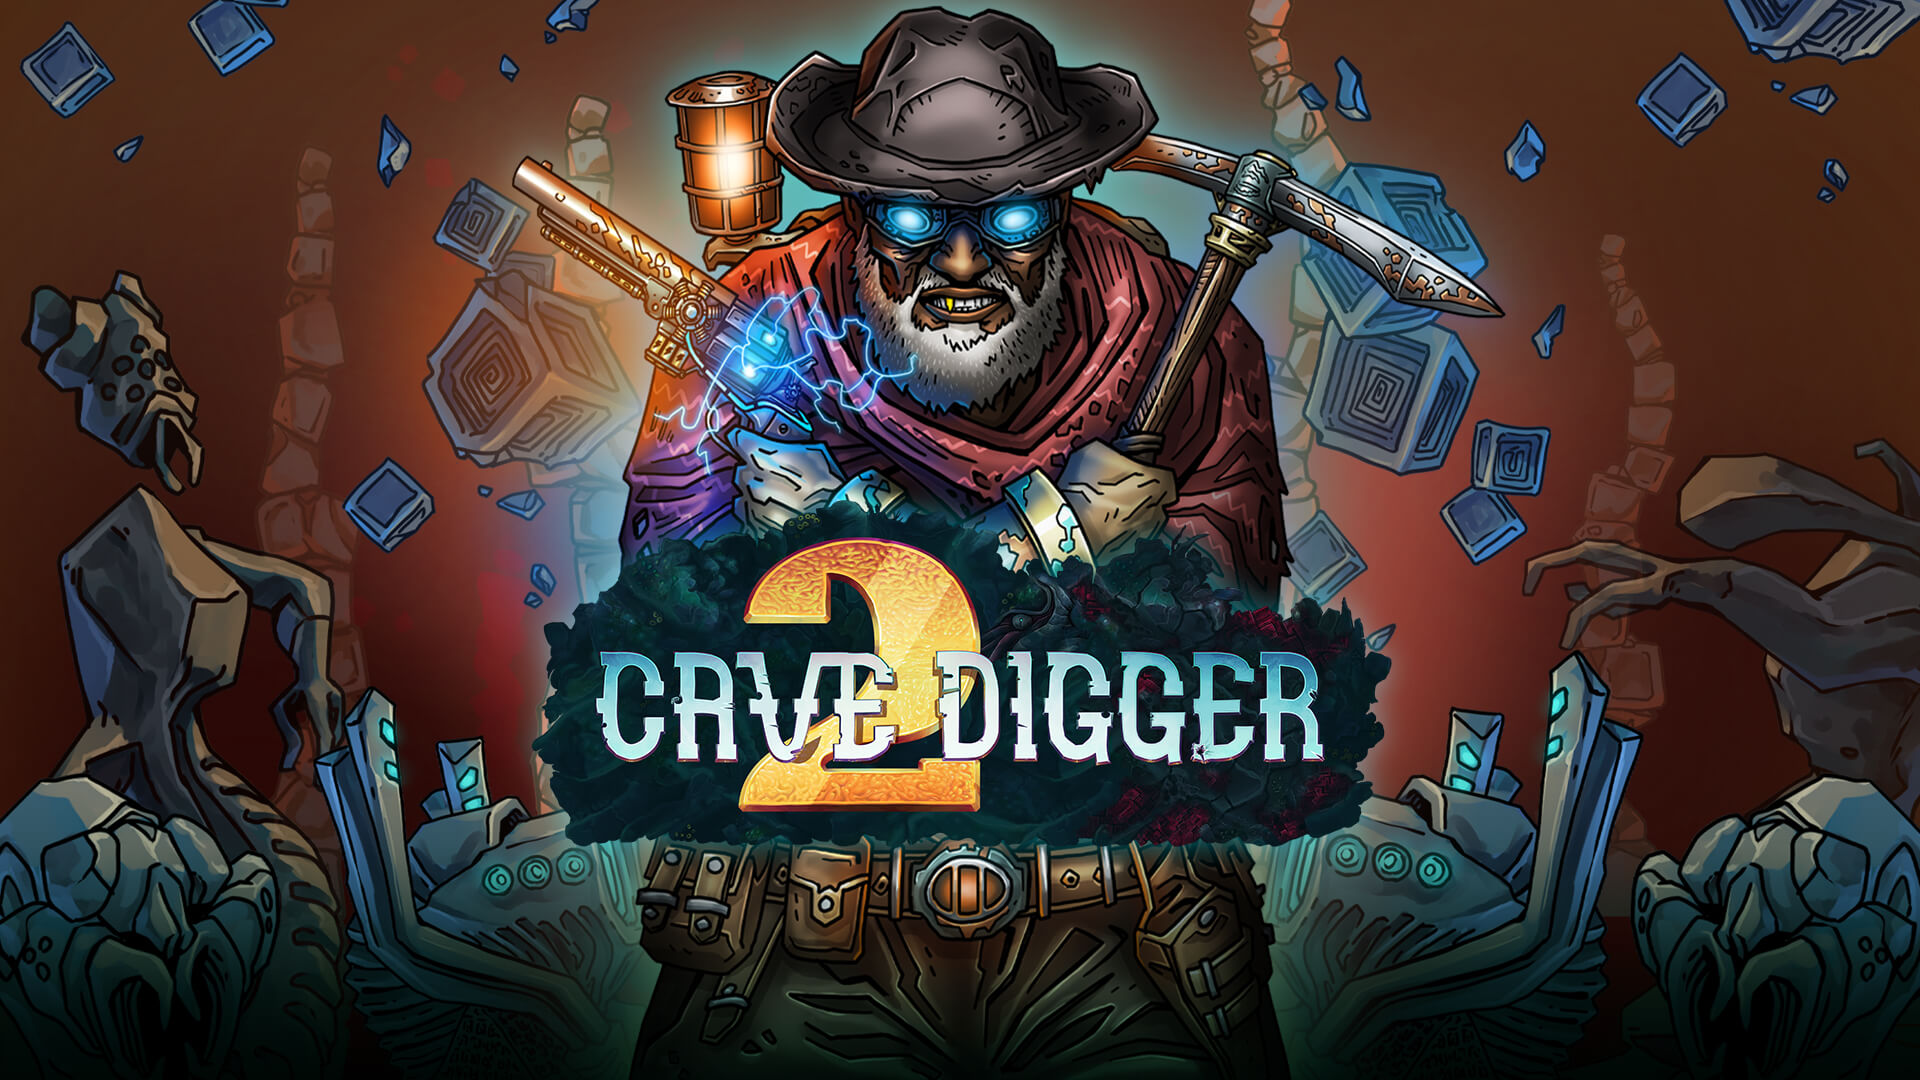 Cave Digger 2 is Out Now on Xbox: Multiplayer Co-op and Crossplay for Everyone